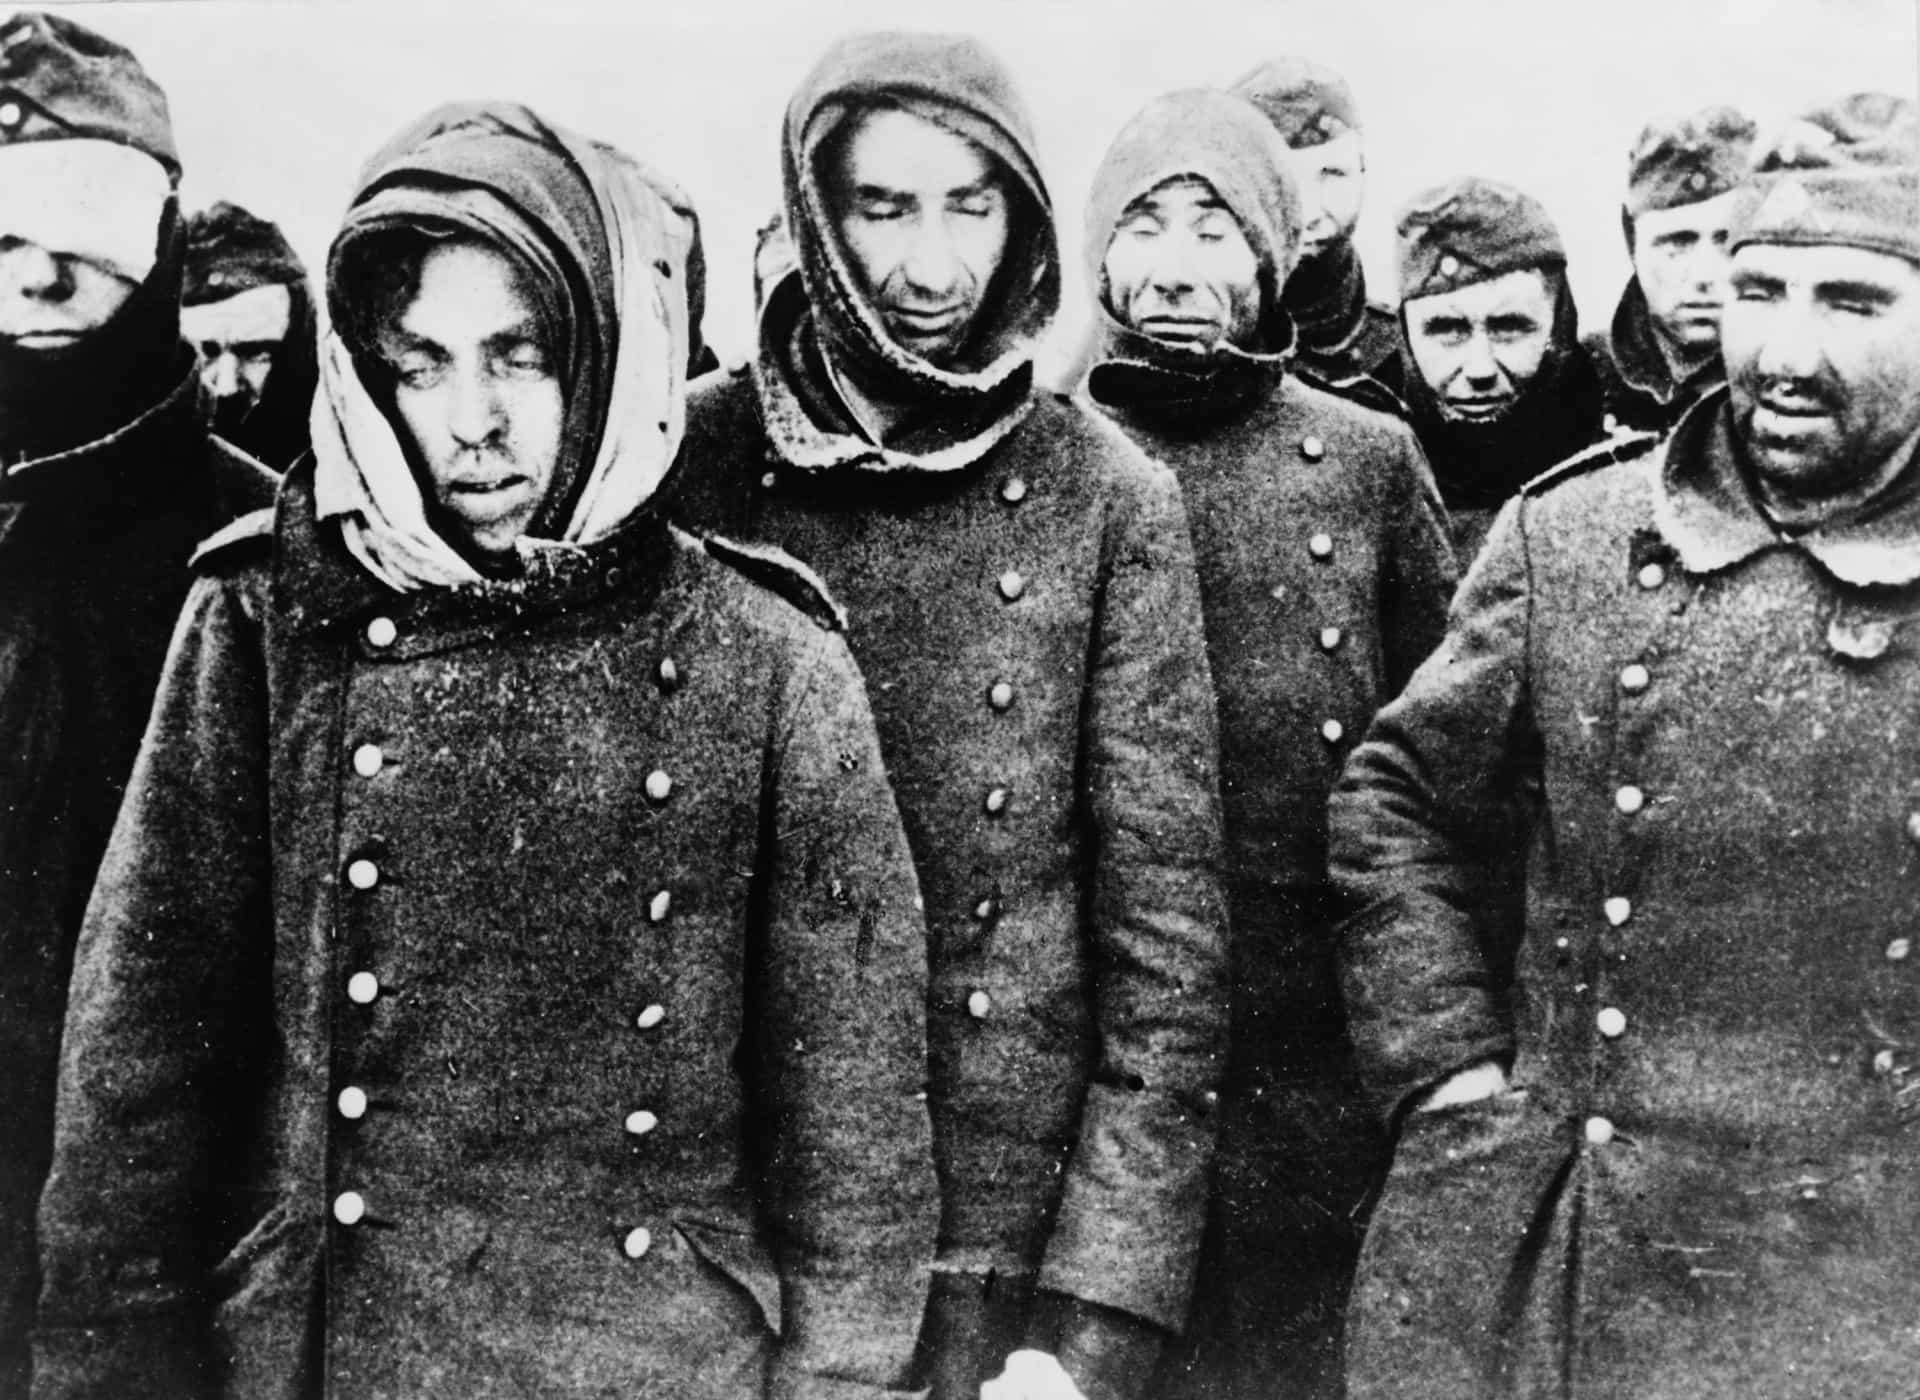 More Germans were killed by Soviet troops in the Battle of Stalingrad than were killed in clashes with American troops.<p><a href="https://www.msn.com/en-us/community/channel/vid-7xx8mnucu55yw63we9va2gwr7uihbxwc68fxqp25x6tg4ftibpra?cvid=94631541bc0f4f89bfd59158d696ad7e">Follow us and access great exclusive content everyday</a></p>